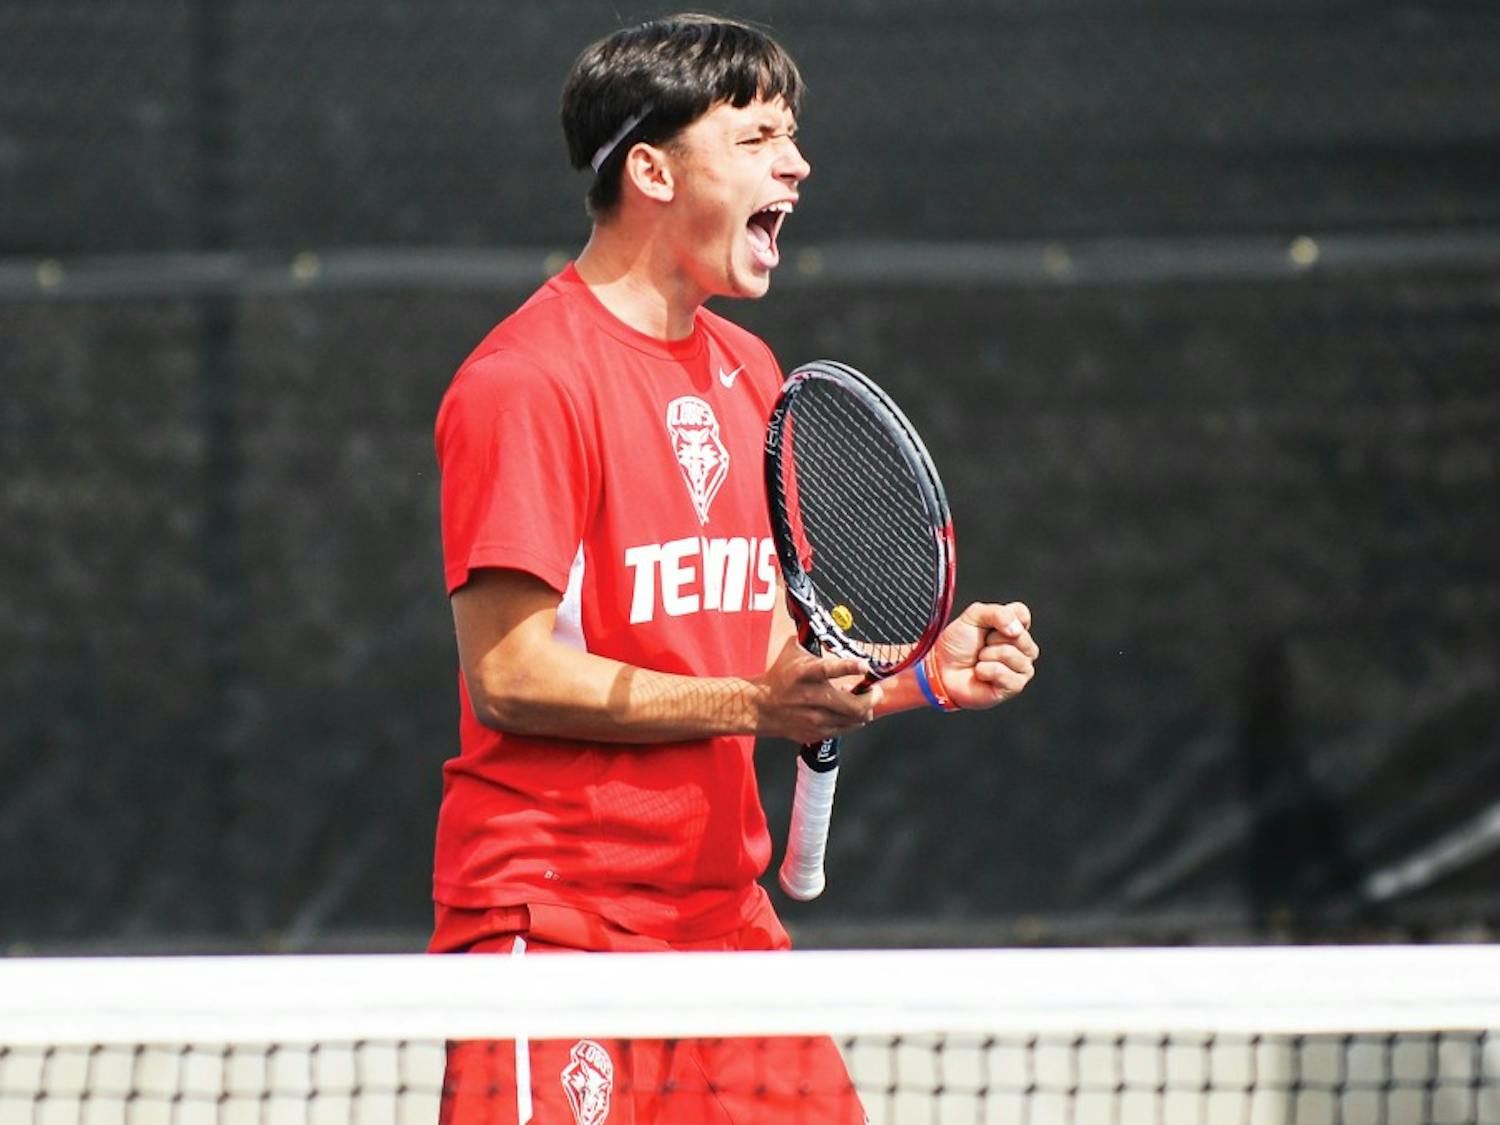 Freshman Ricky Hernandez-Tong celebrates after scoring a point against Air Force Saturday afternoon at the McKinnon Family Tennis Stadium. The Lobos swept both BYU and Air Force this past weekend in Albuquerque.